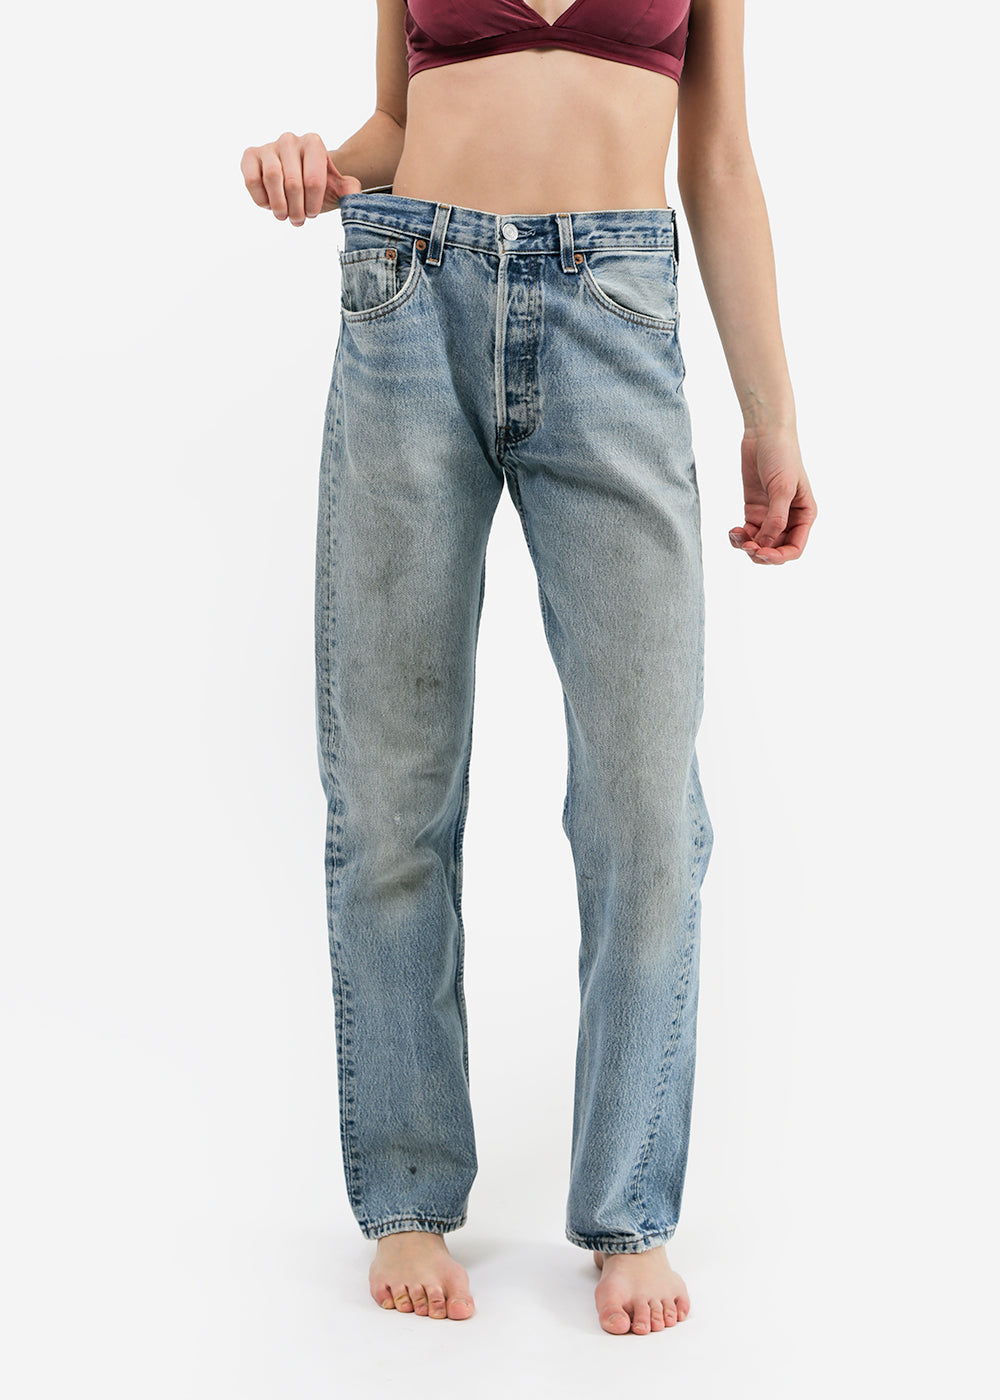 Vintage Levi's 505 in Light Wash by 